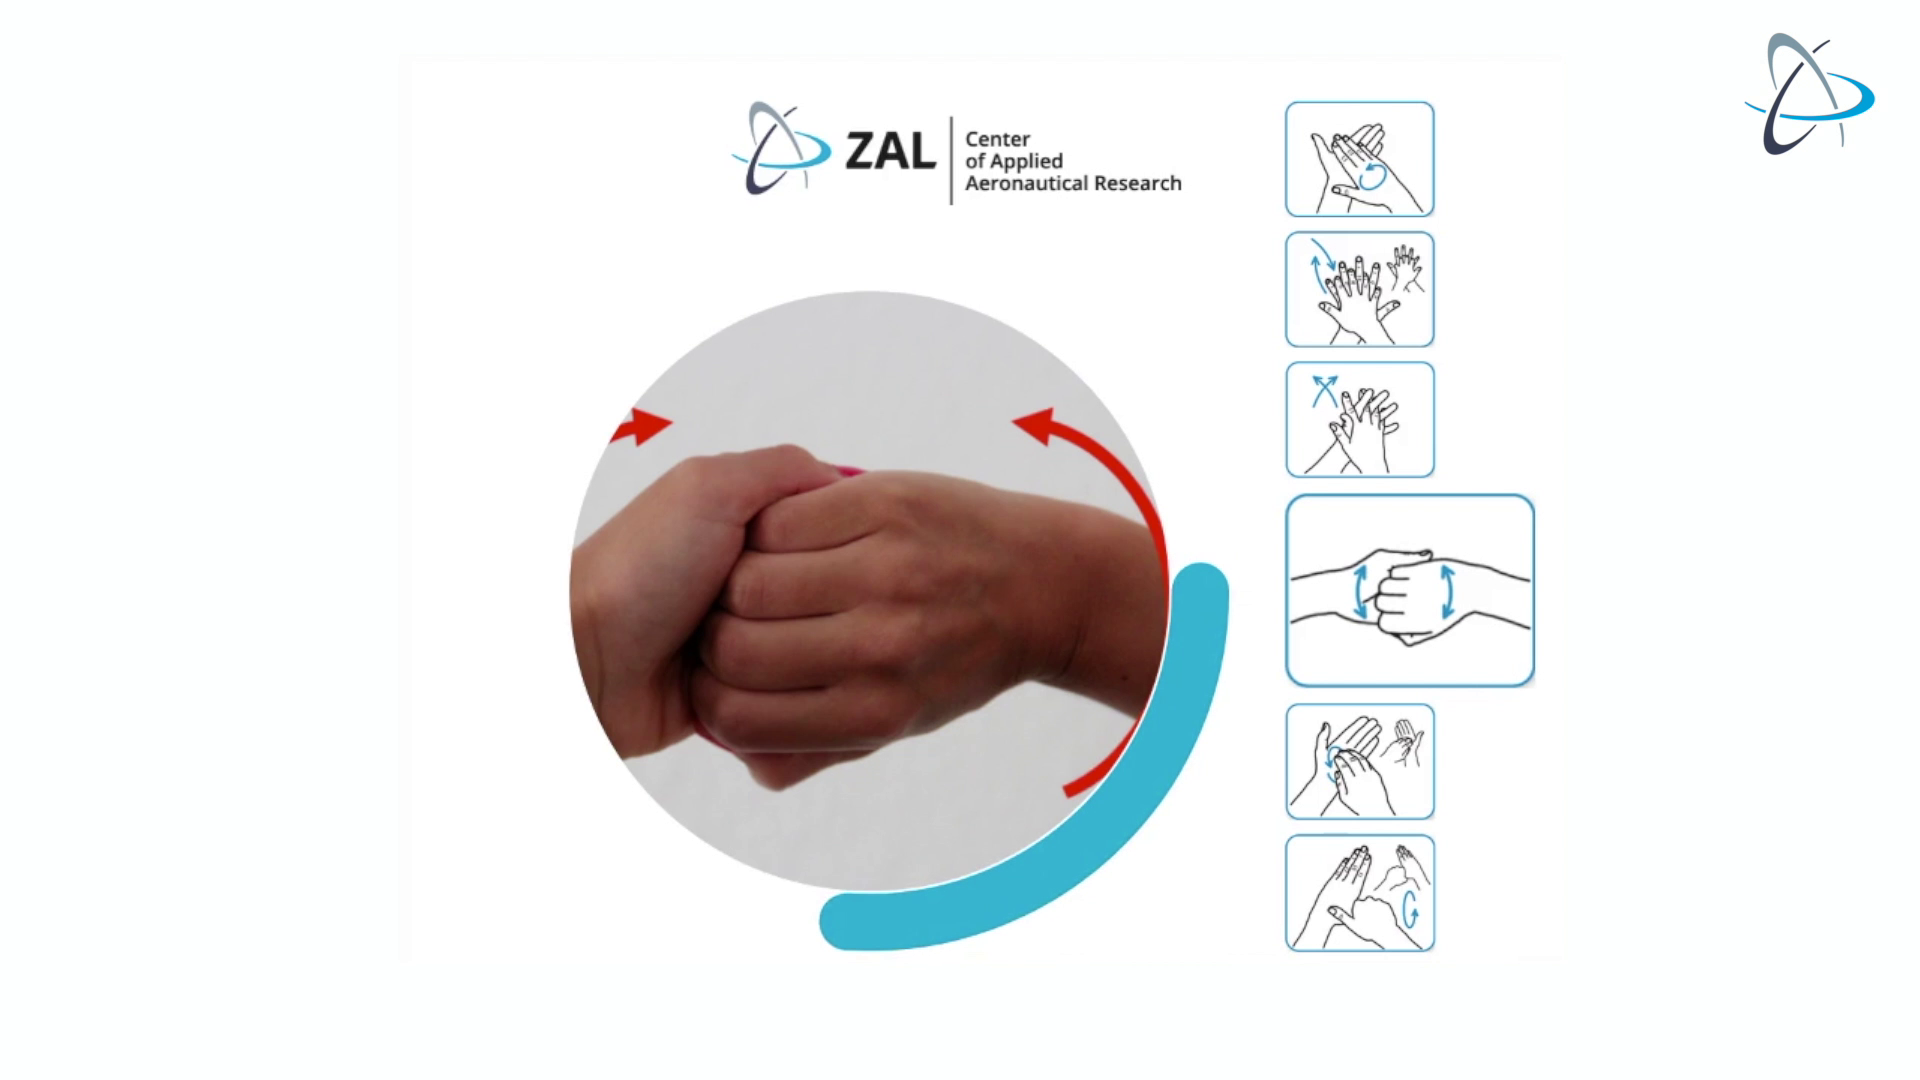 In six steps – from correct soap application to scrubbing the areas between the fingers – gamified handwashing shows how a passenger should clean their hands.